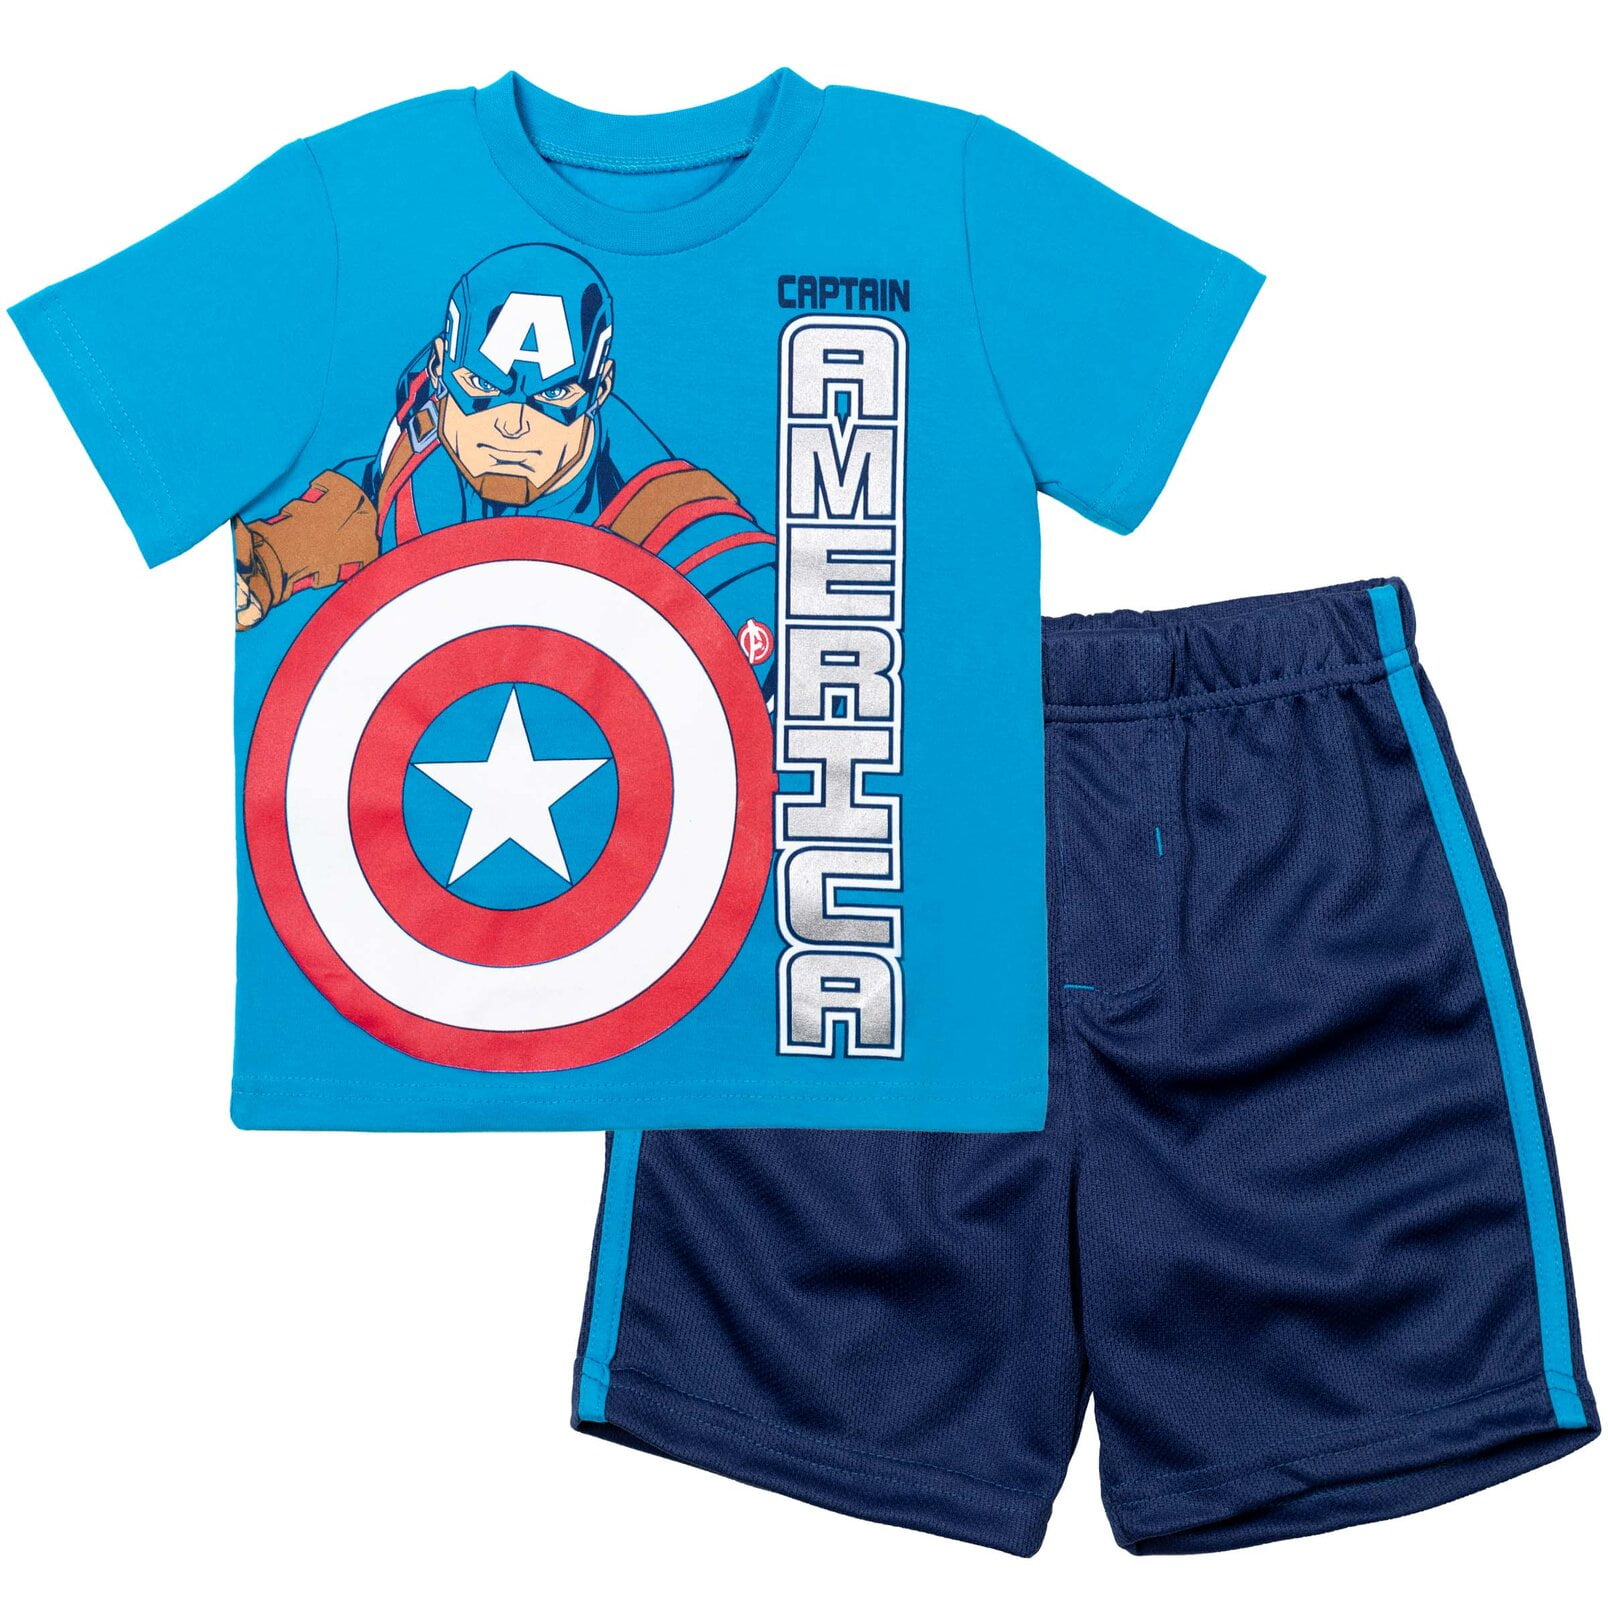 Marvel Avengers Captain America Toddler Boys T-Shirt and MeshShorts Outfit  Set Toddler to Big Kid